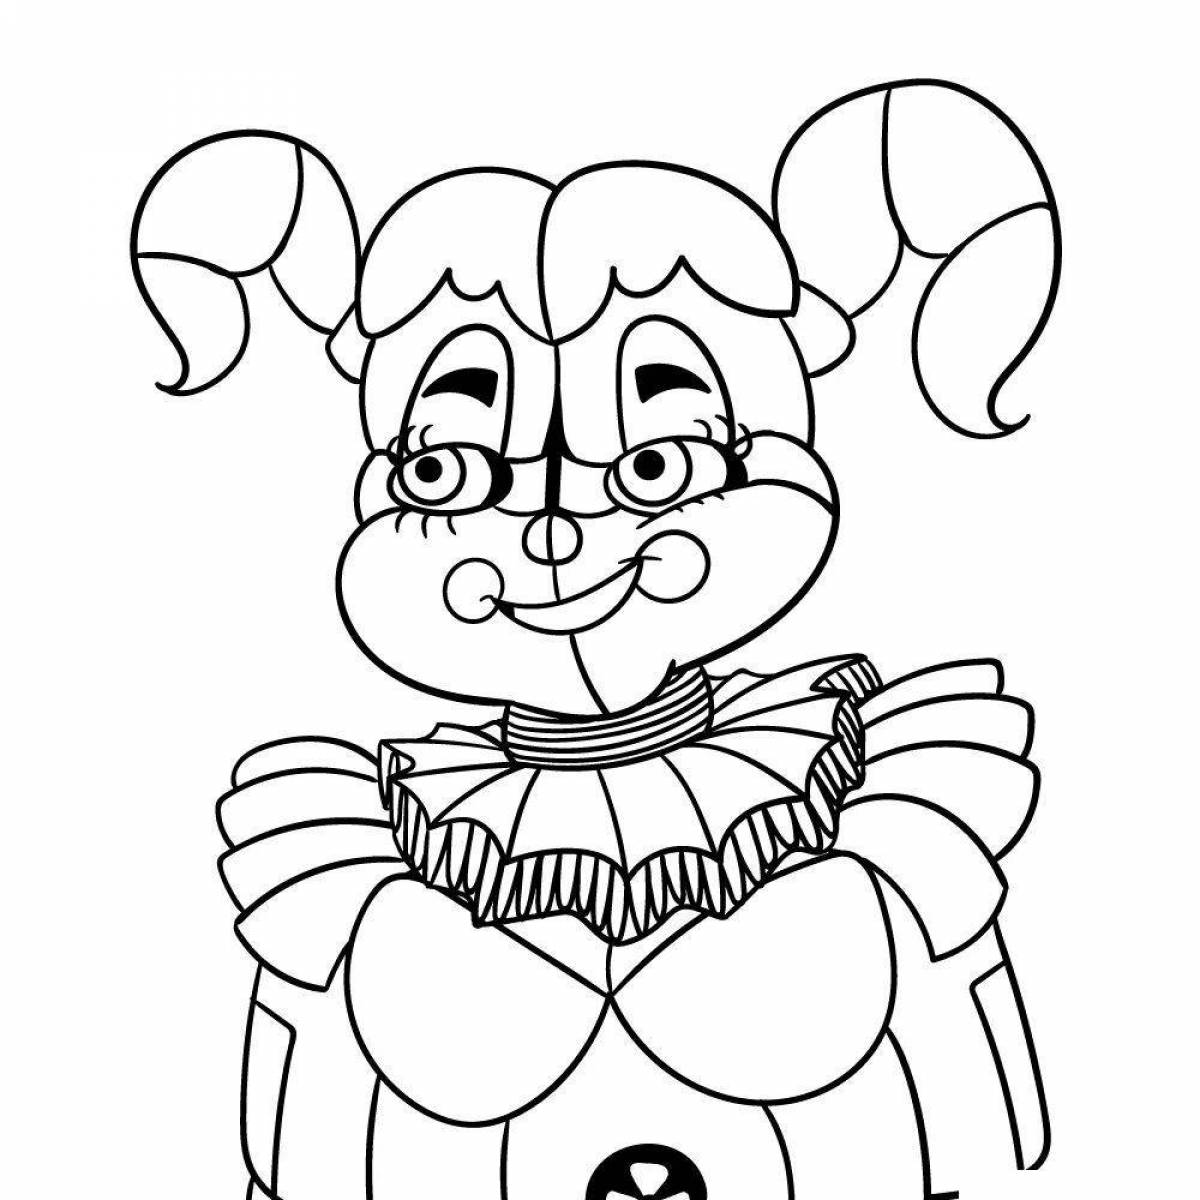 Exciting fnaf 5 coloring